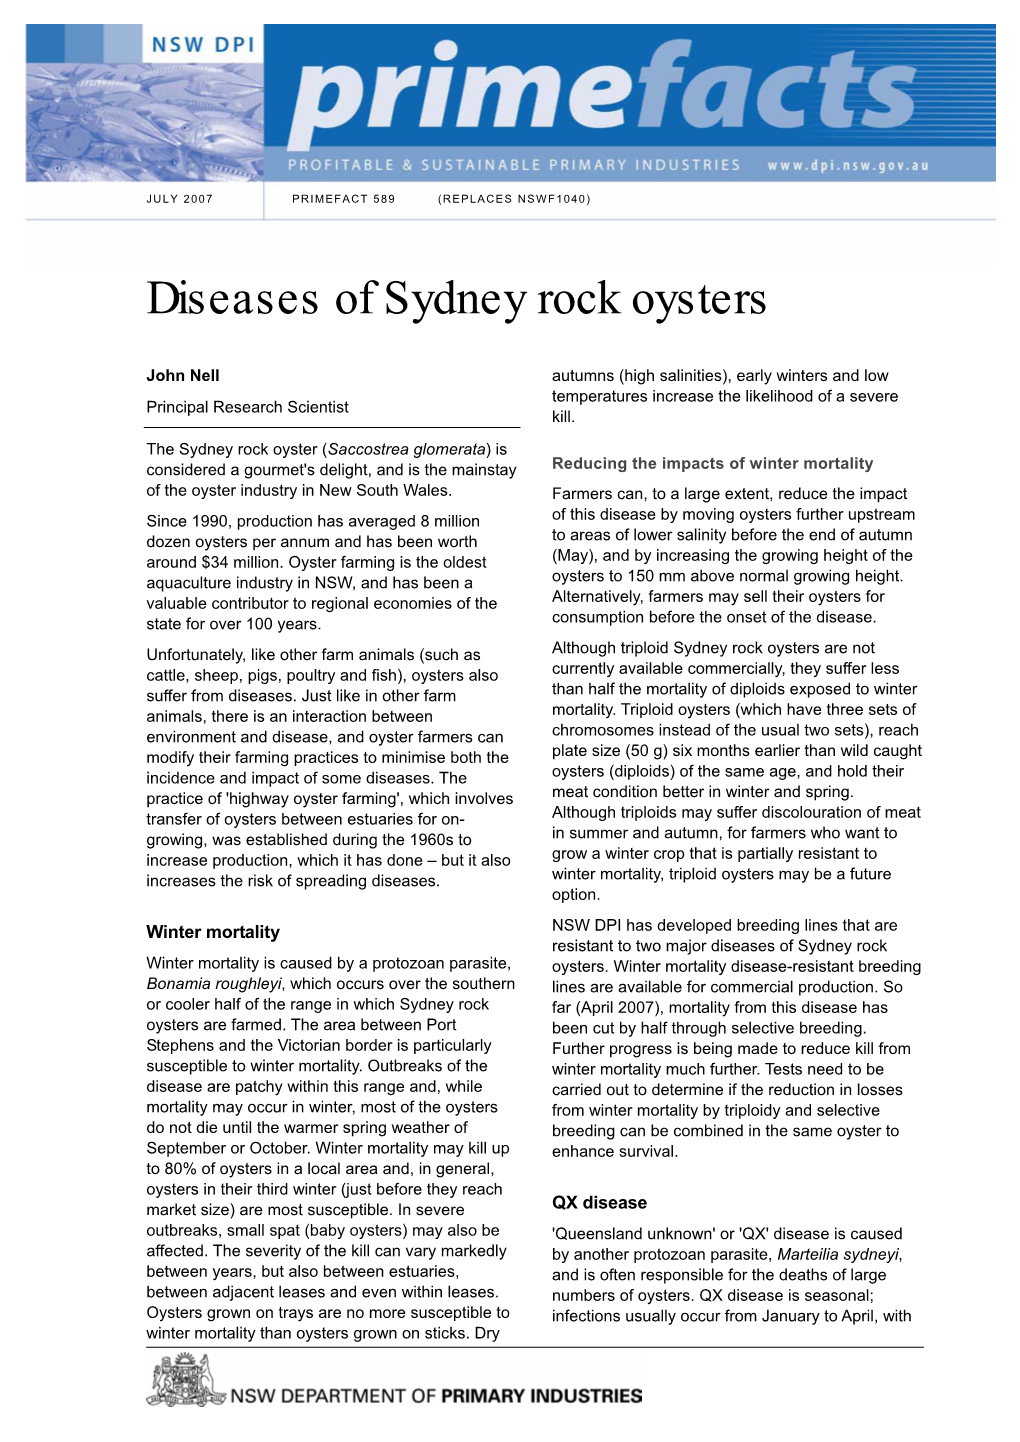 Diseases of Sydney Rock Oysters